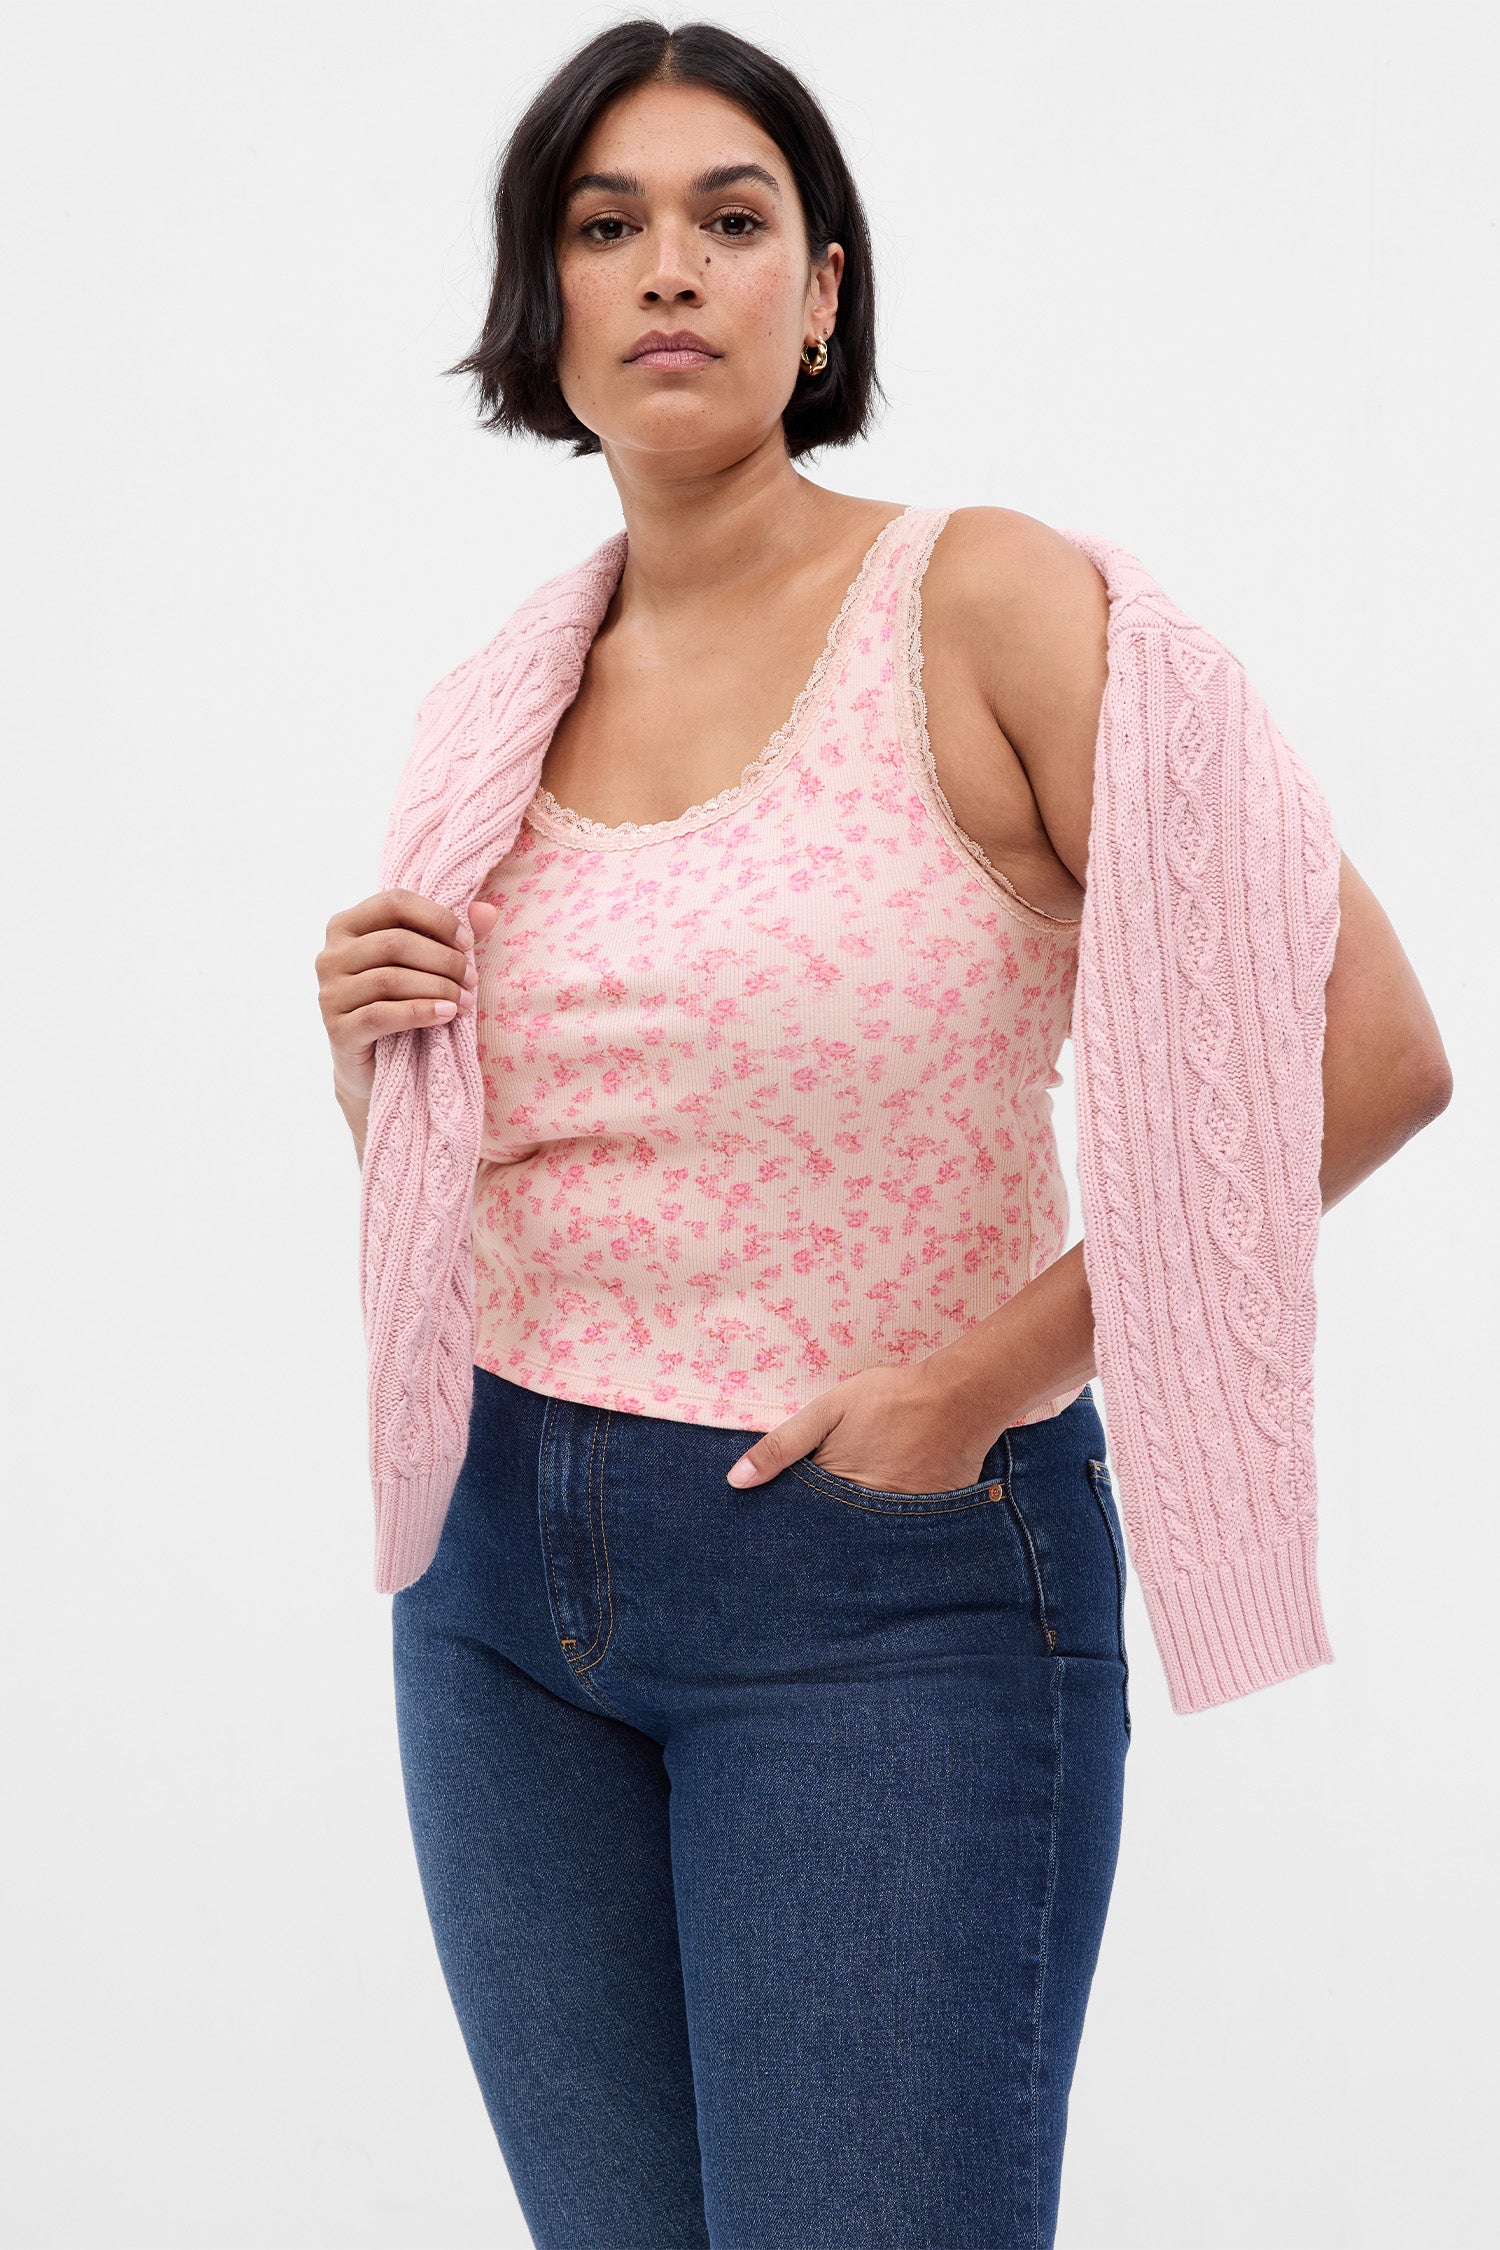 Model wearing pink floral tank top with lace detail at neckline